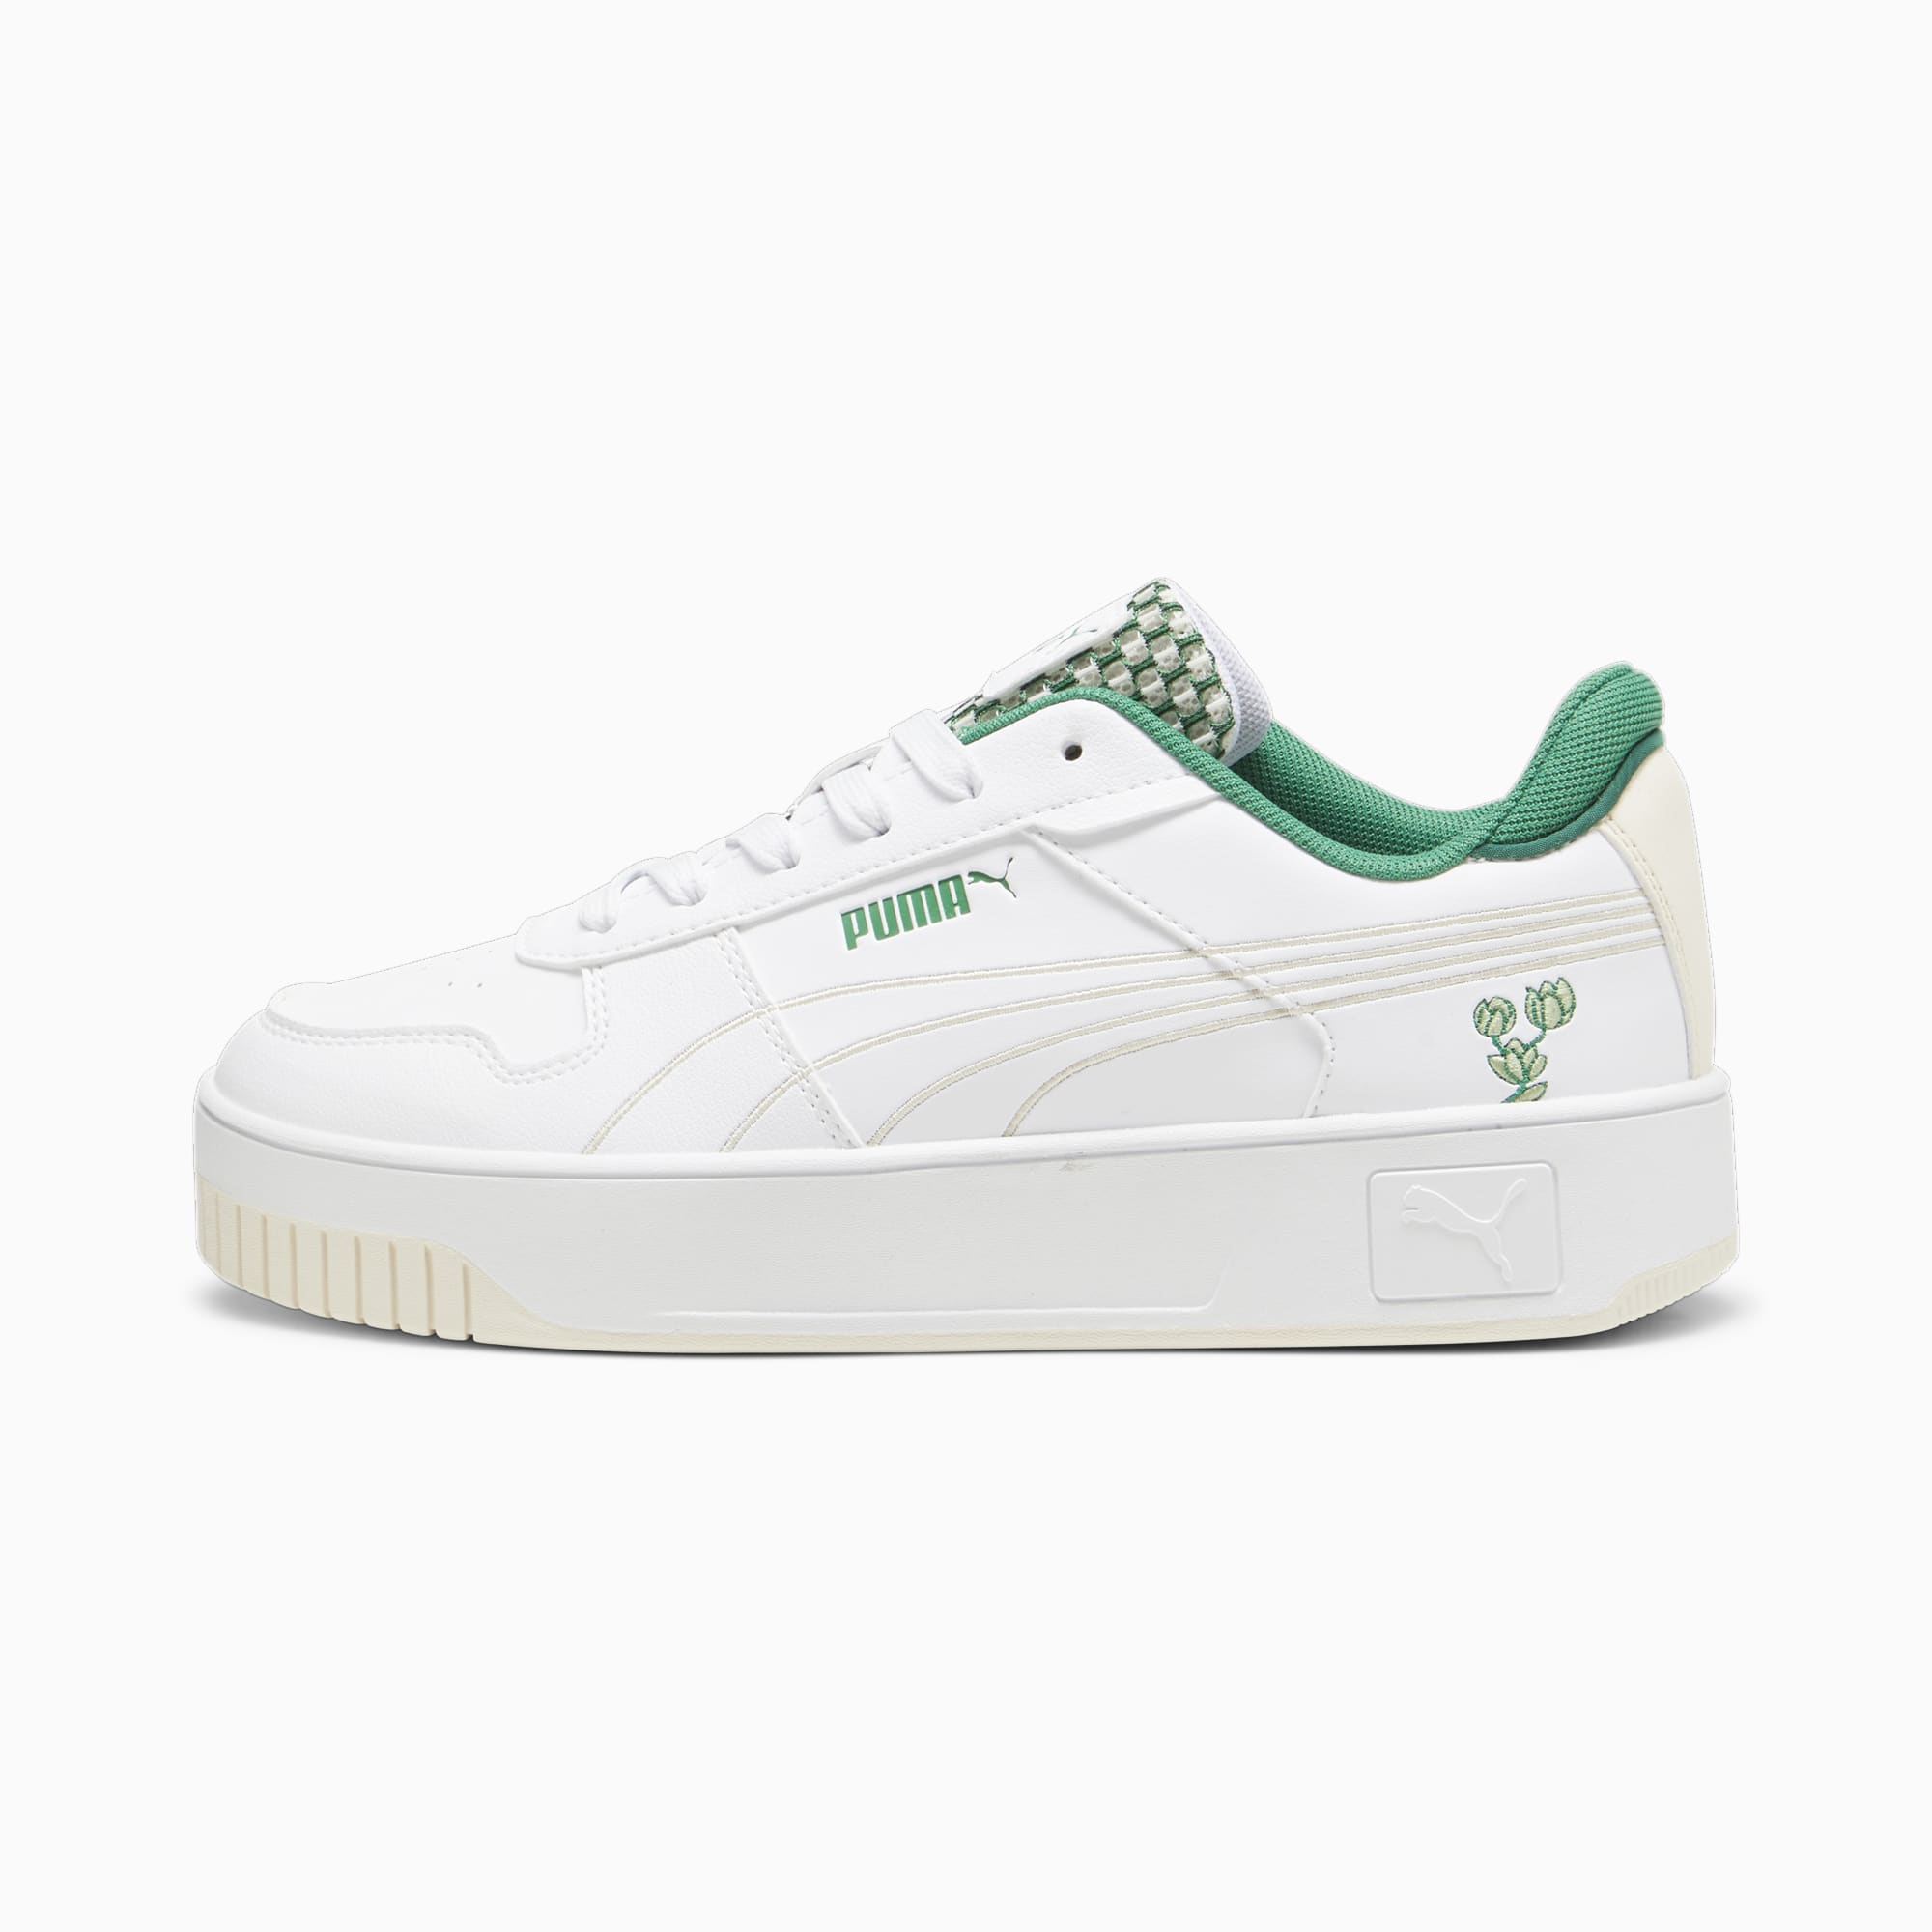 PUMA Carina Street Blossom Sneakers Voor Dames, Wit/Groen/Rood